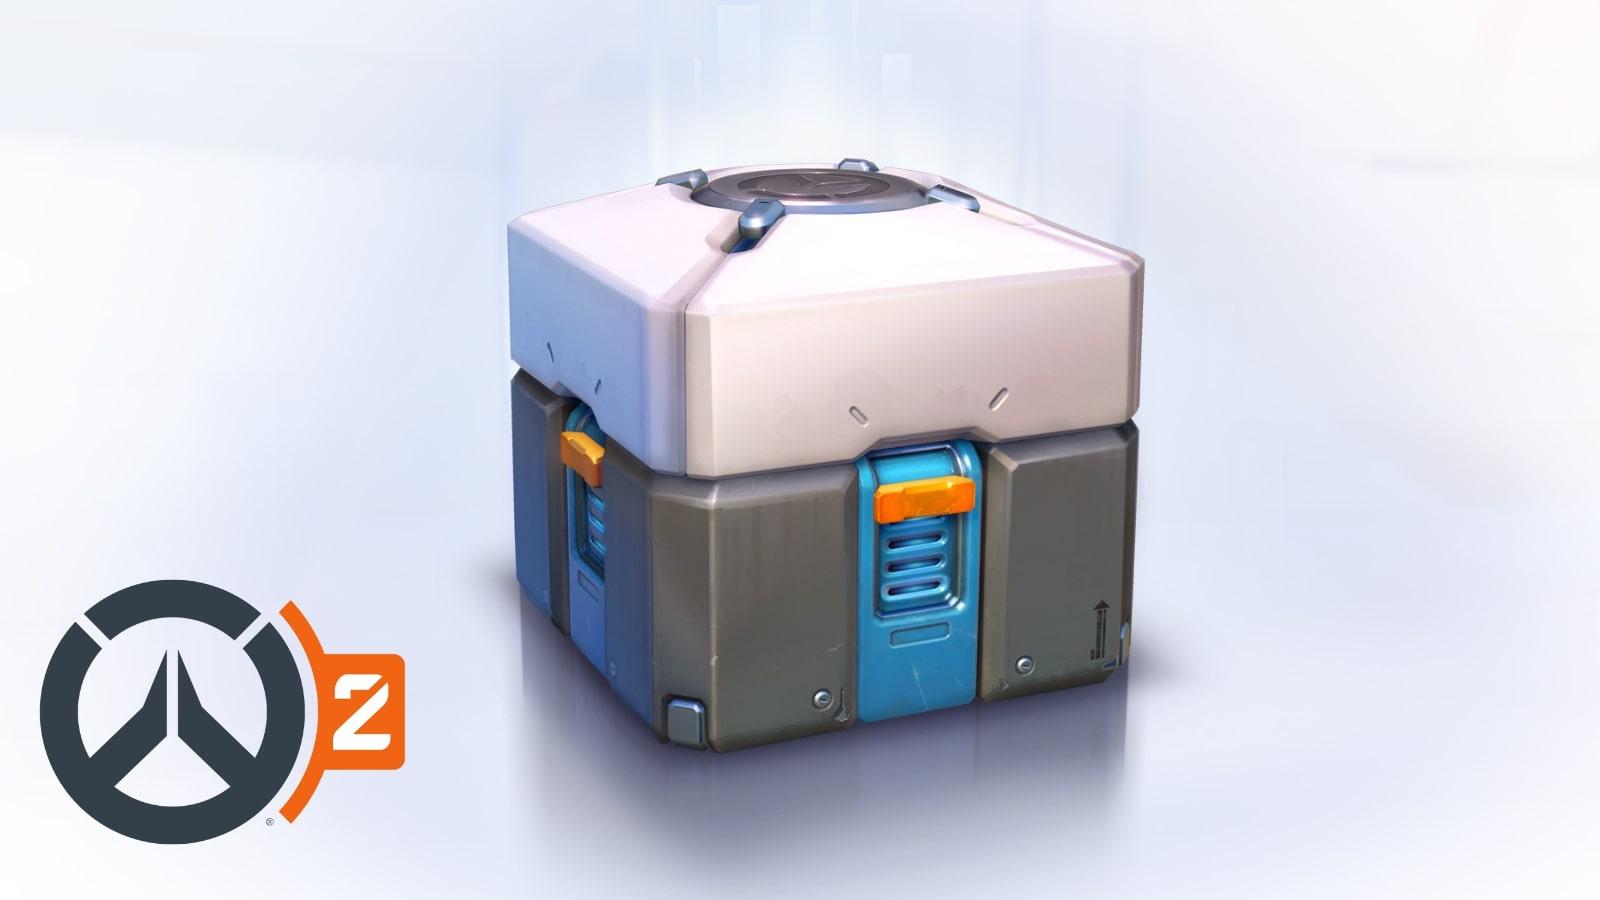 Overwatch 1 lootbox image still with OW2 logo